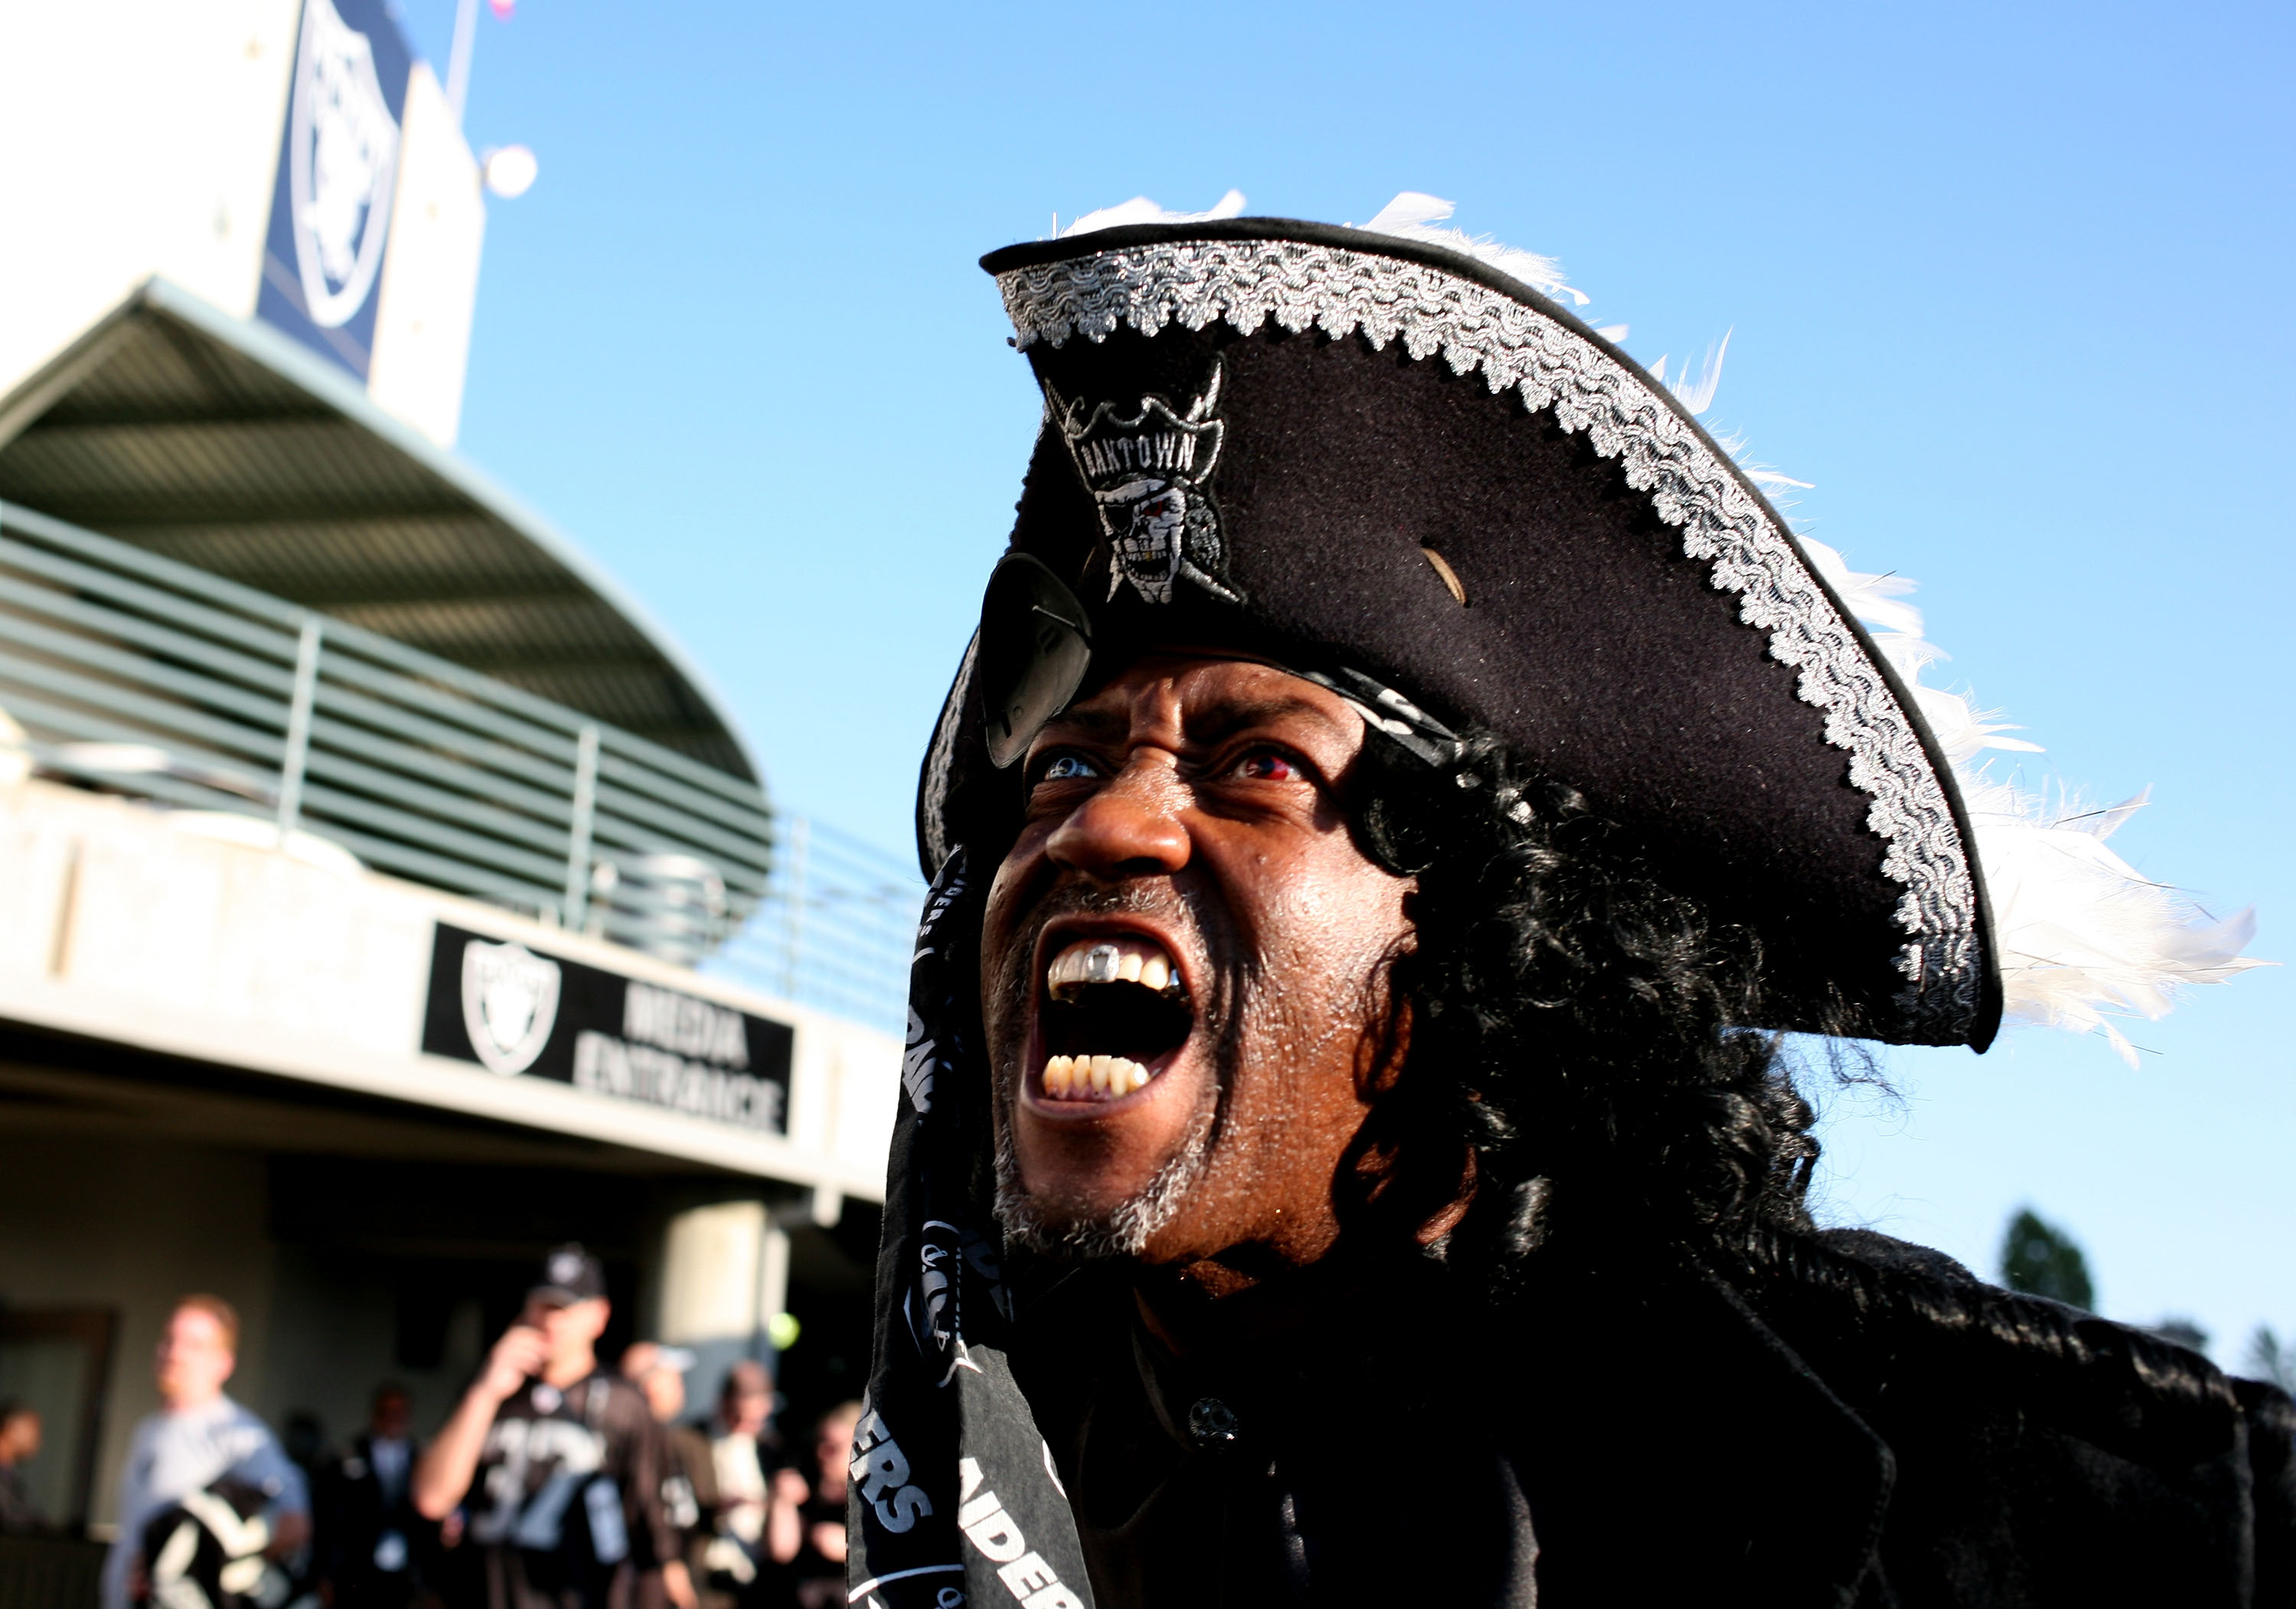 OAKLAND, CA - SEPTEMBER 08: An Oakland Raider fan walks around the stadium before the Denver Broncos and the Oakland Raiders NFL game at McAfee Coliseum on September 8, 2008 in Oakland, California.  (Photo by Jed Jacobsohn/Getty Images)